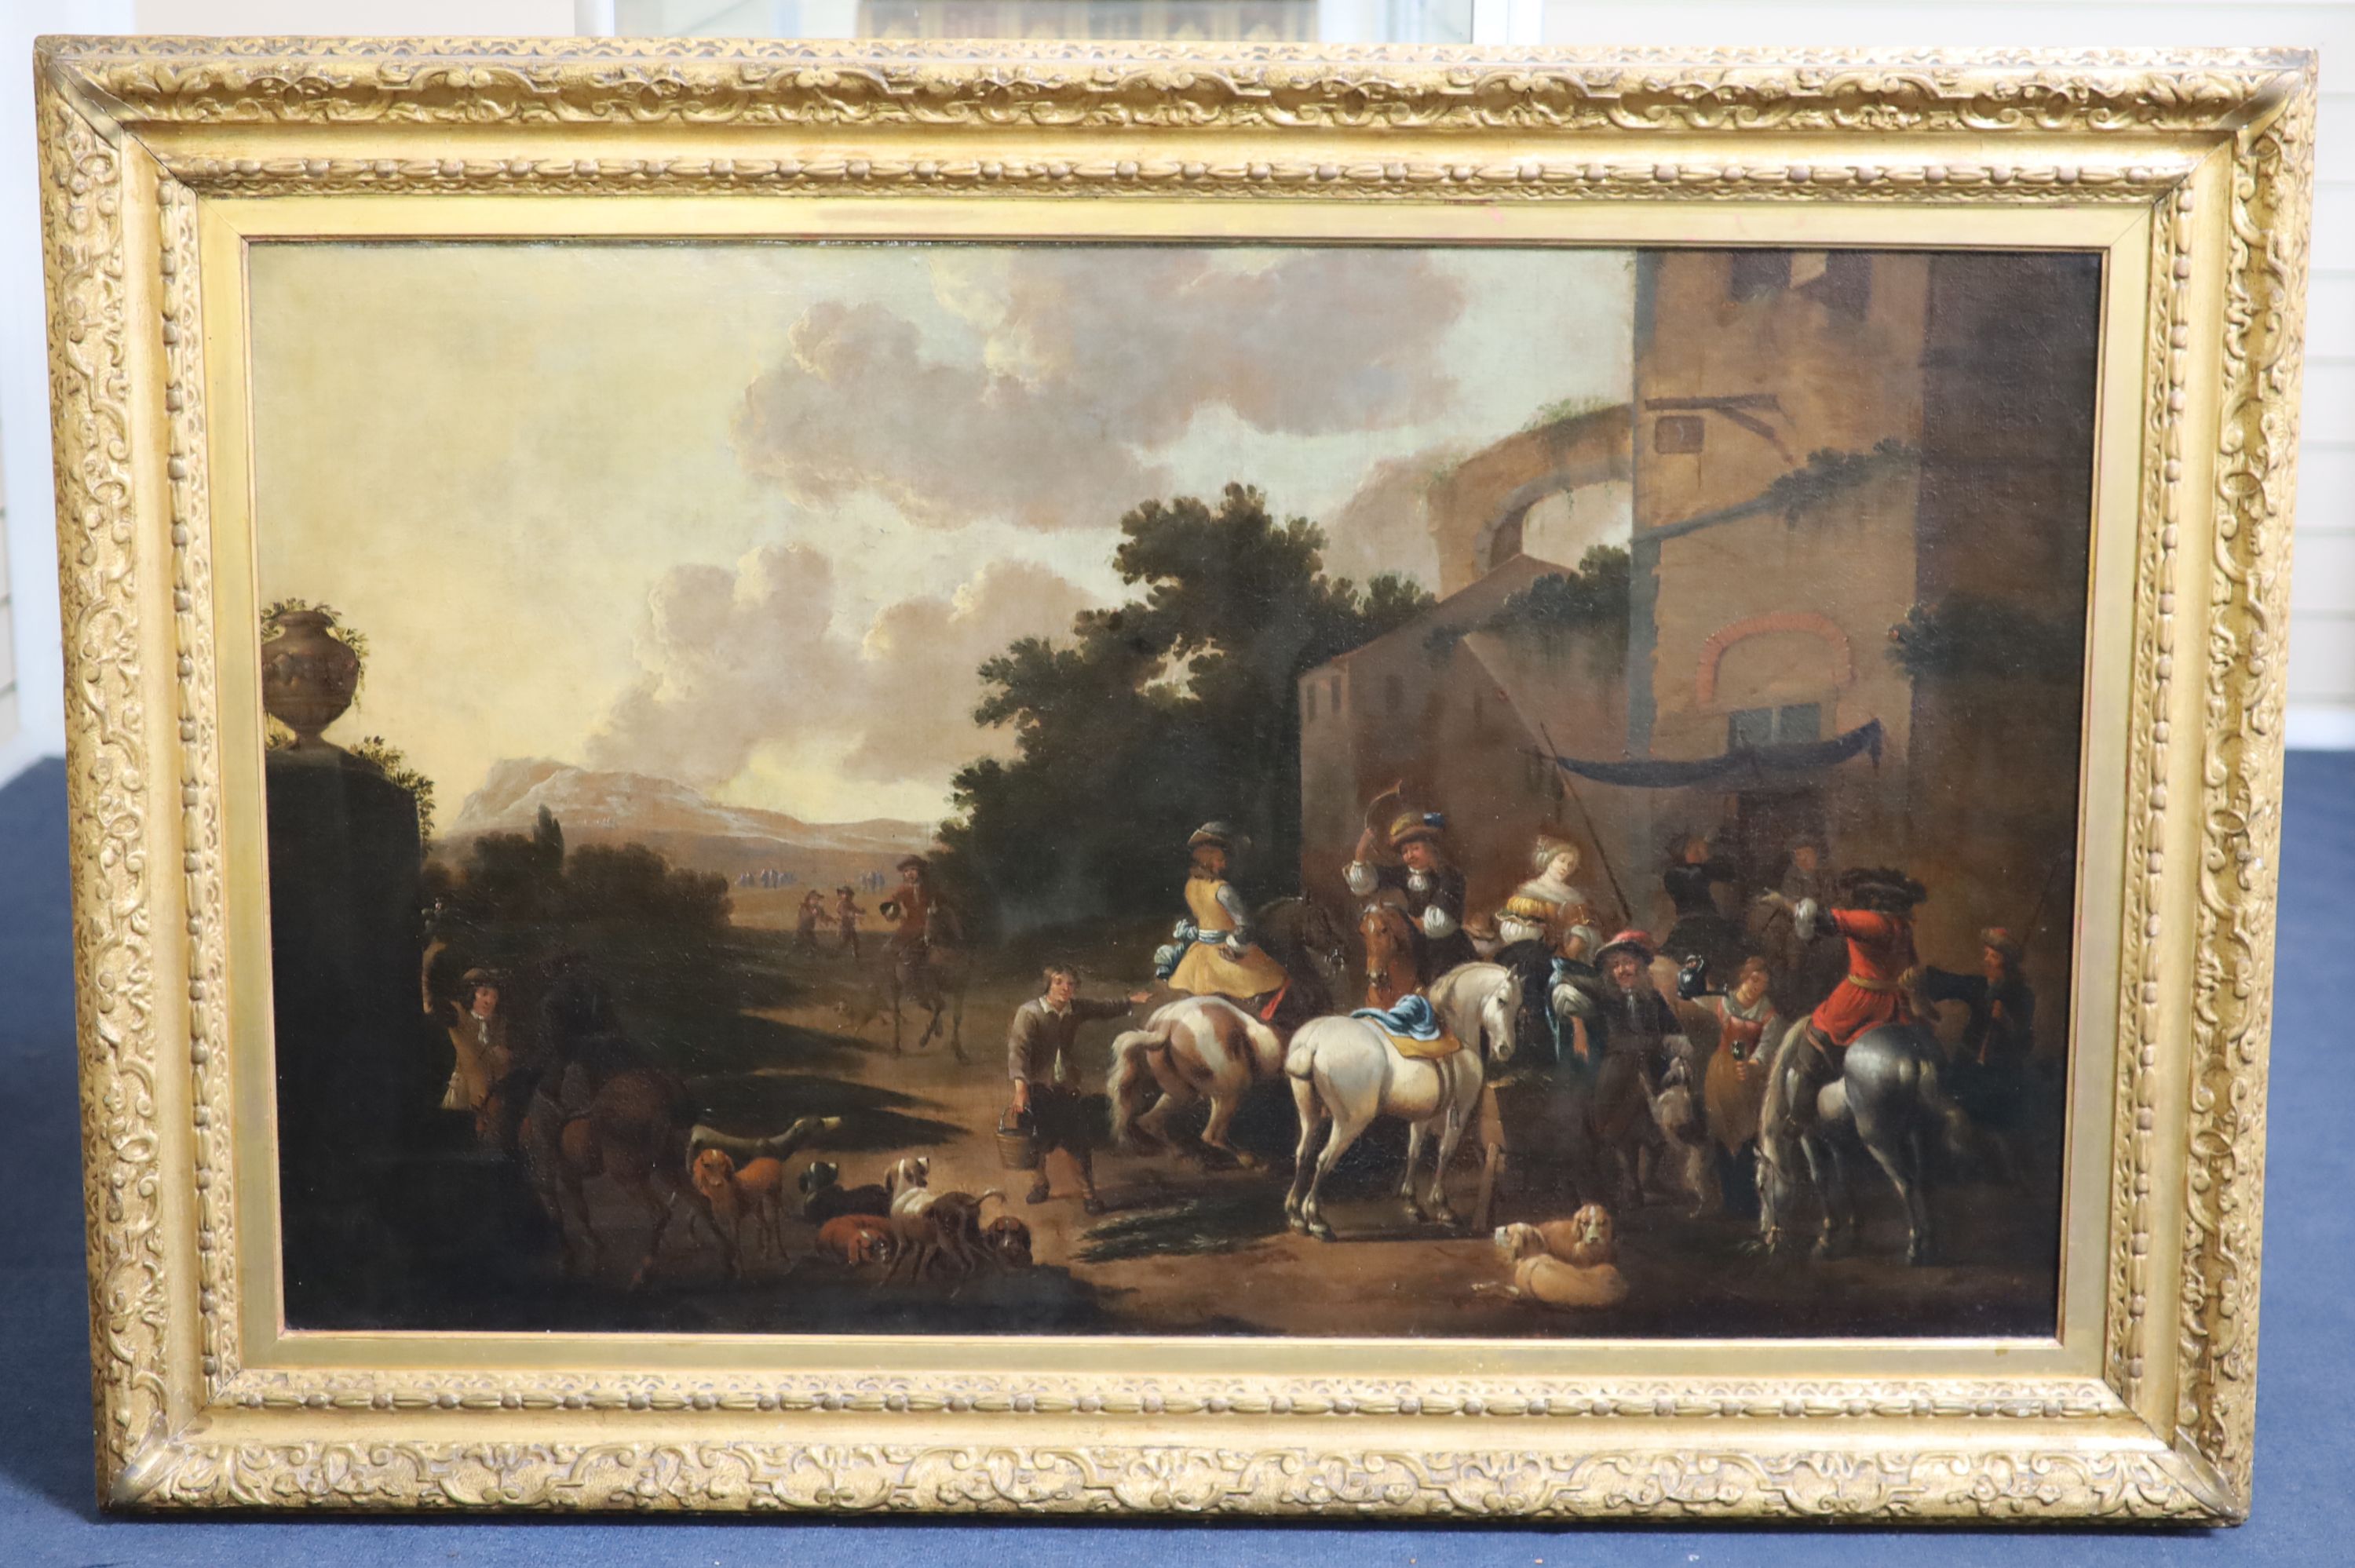 Attributed to Philips Wouwerman (1619-1668), A hunting party outside a tavern, oil on canvas, 69.5 x 140cm